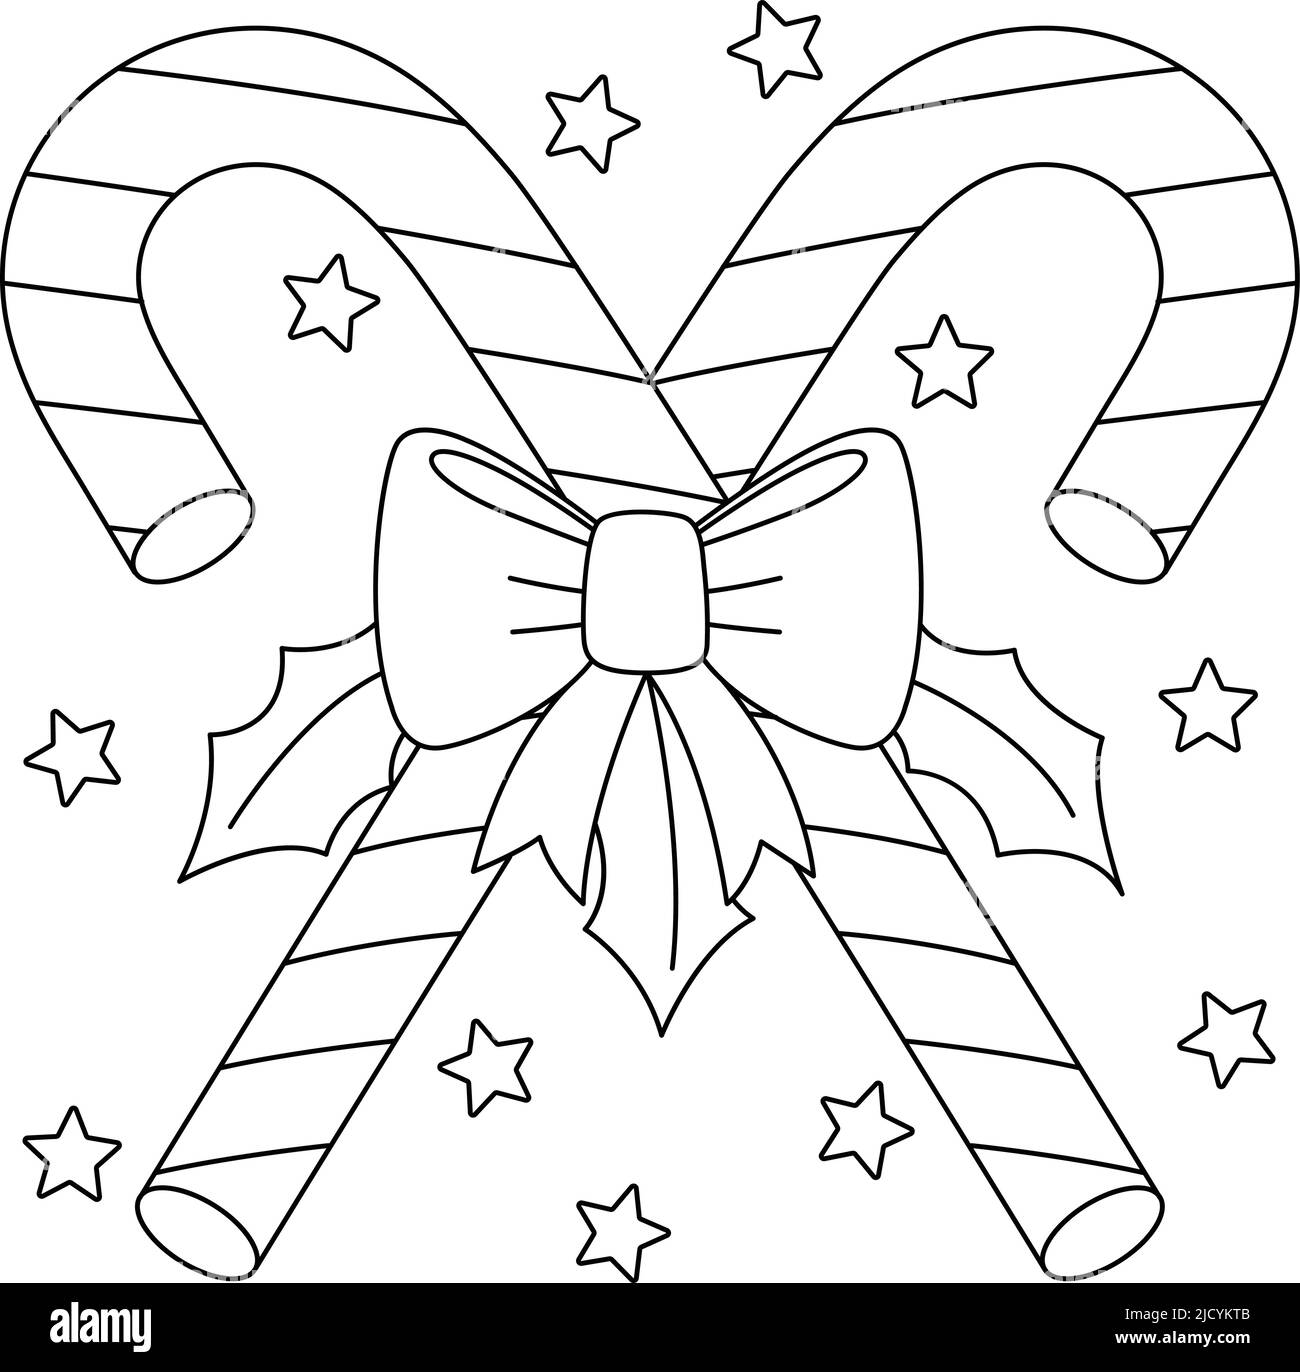 Christmas candy cane coloring page for kids stock vector image art